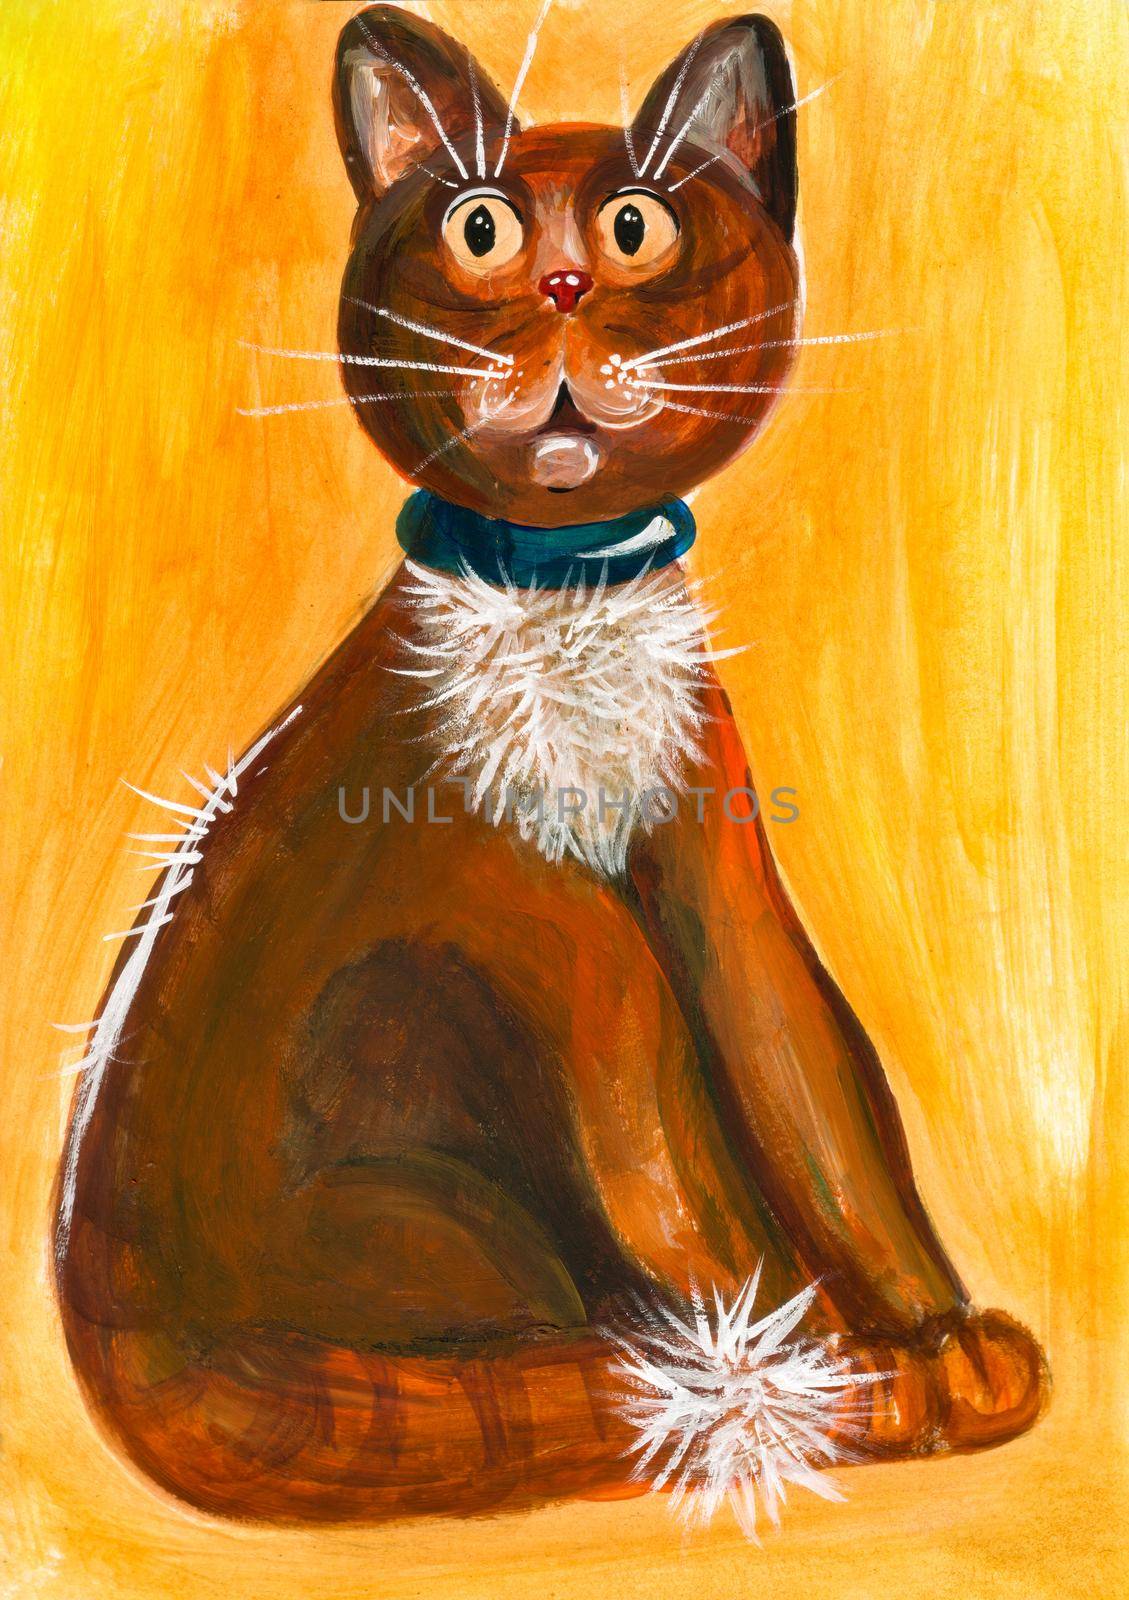 Drawn with acrylic paints funny cat with big eyes on a yellow background by Madhourse